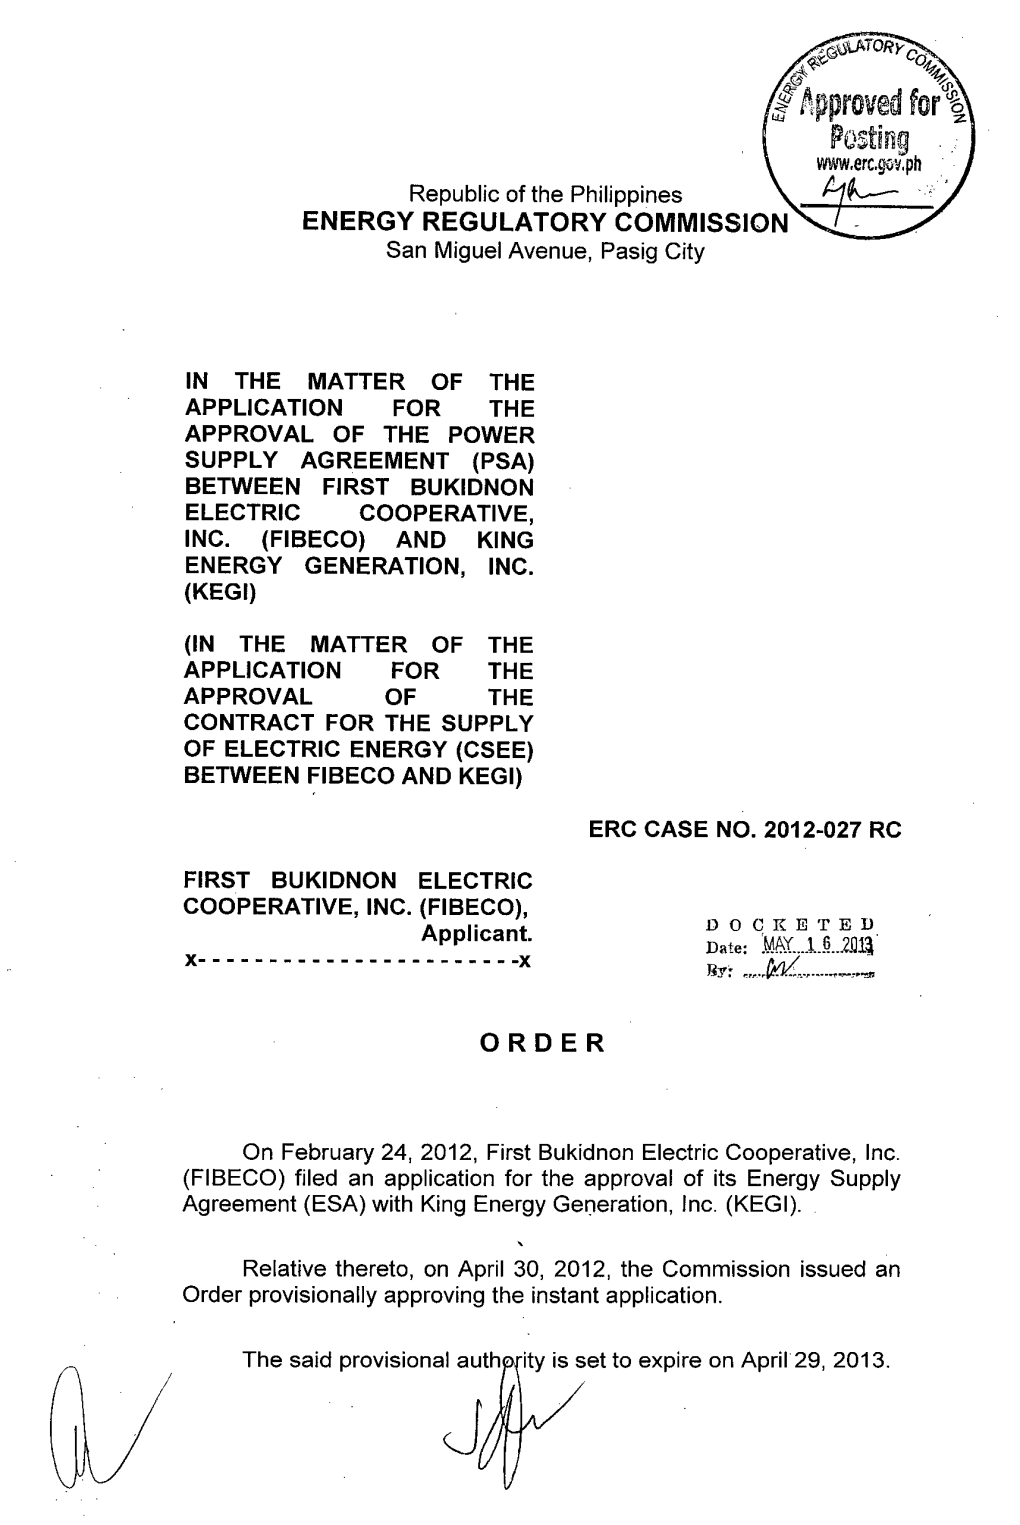 Approvs For: Postrig Republic of the Philippines 2*- ENERGY REGULATORY COMMISSION San Miguel Avenue, Pasig City